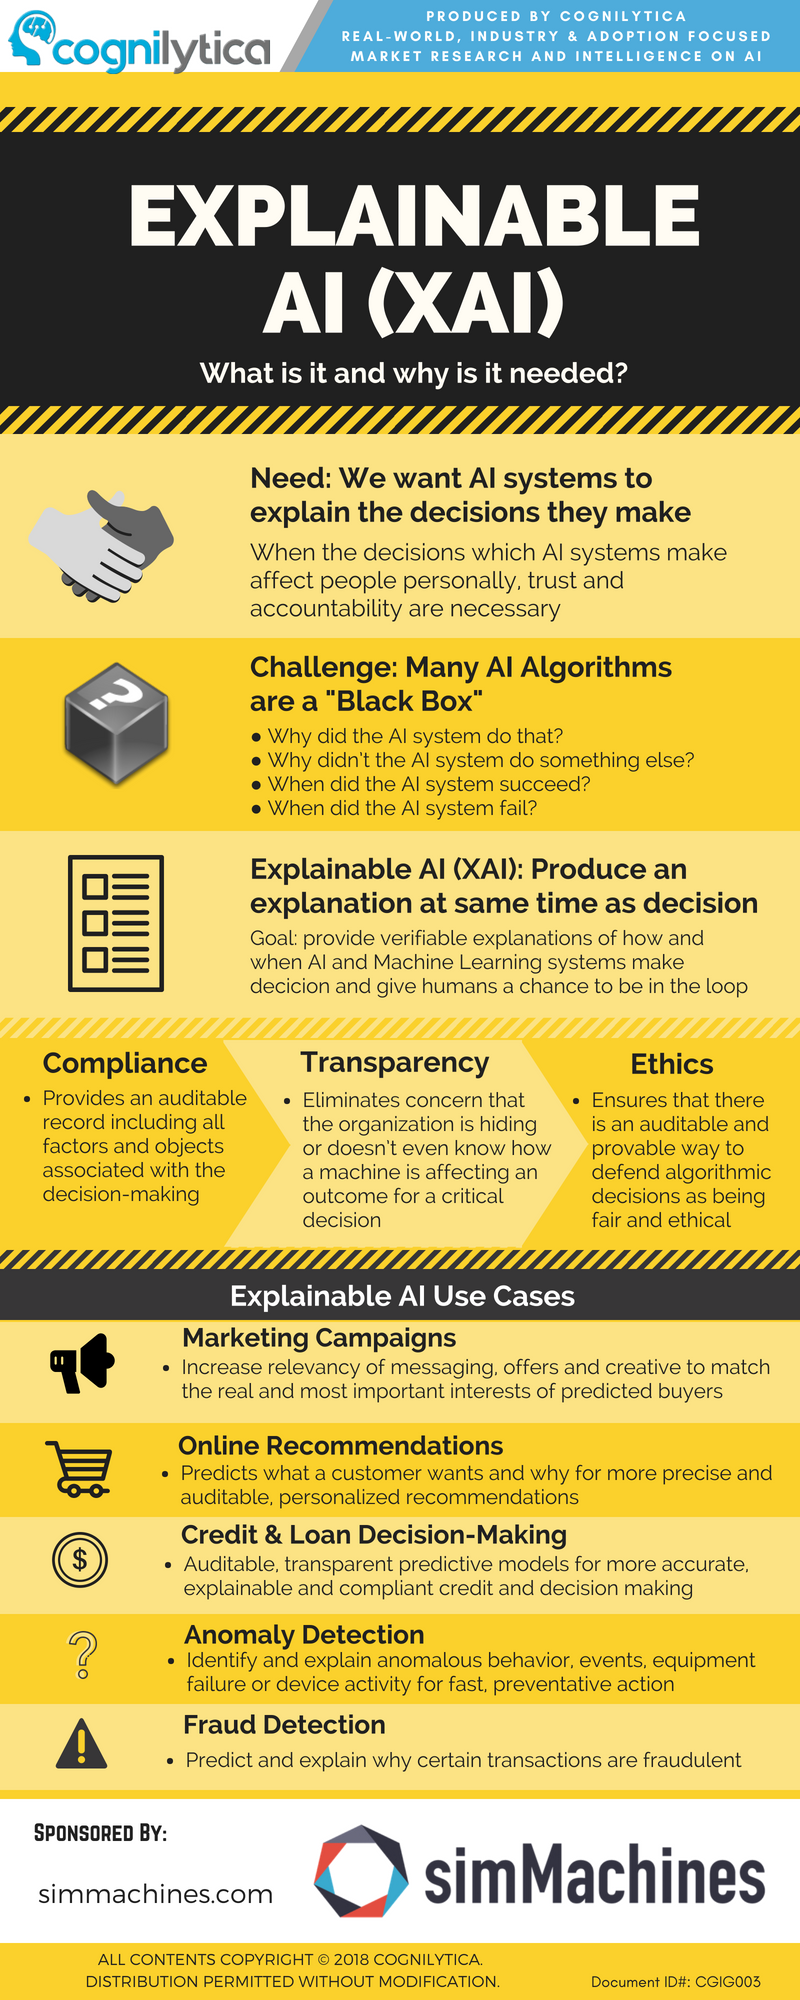 Explainable AI - What is it and why is it needed?